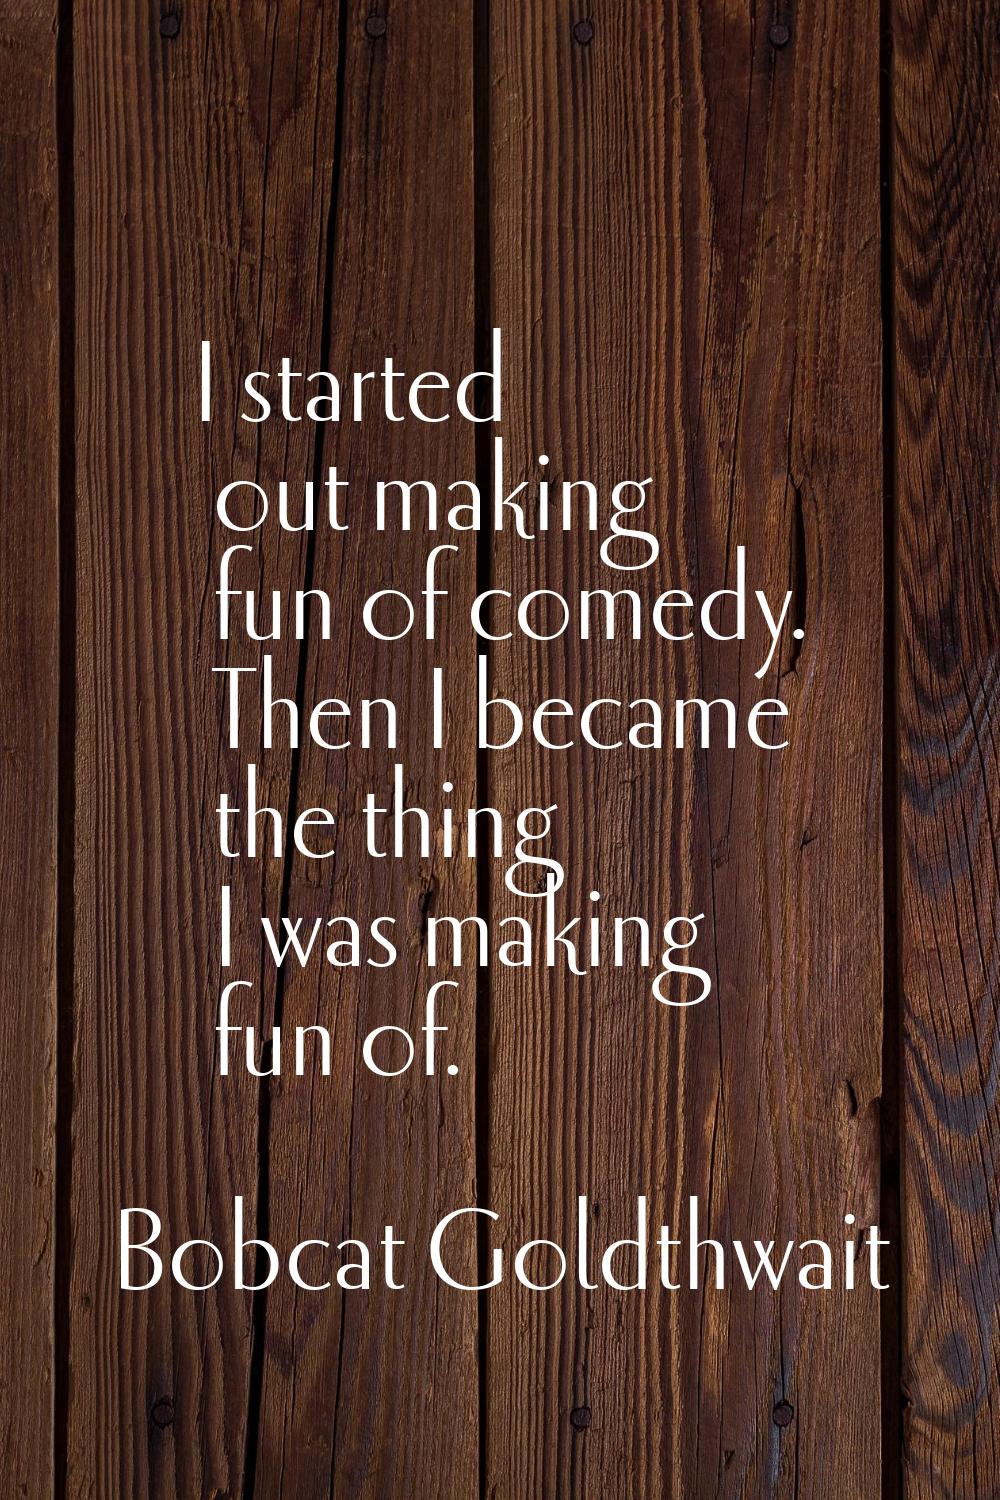 I started out making fun of comedy. Then I became the thing I was making fun of.